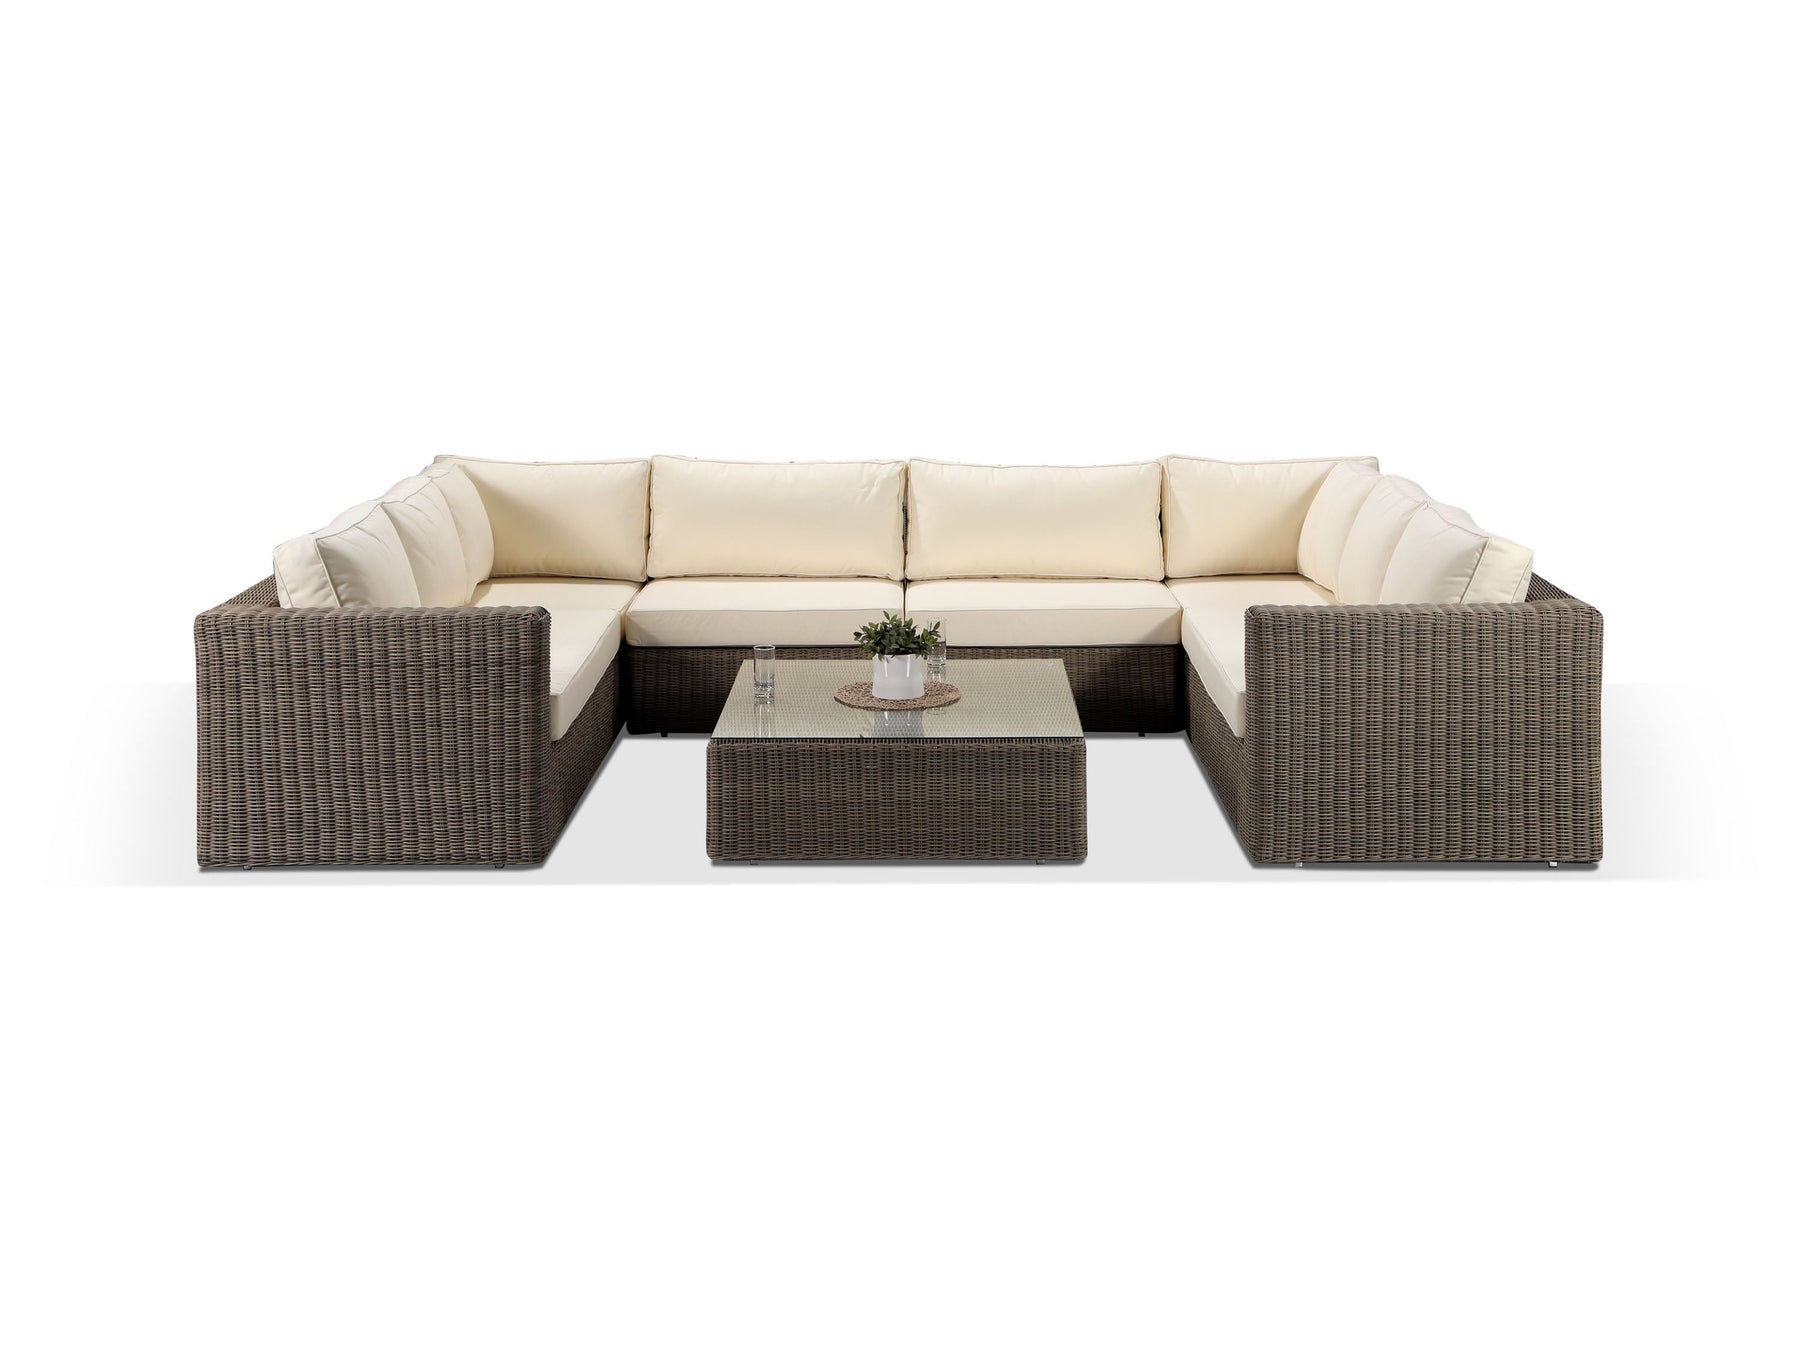 Alexander Francis Garden Furniture Tosca Natural Brown Large U Shaped Rattan Sofa with Cream Cushions